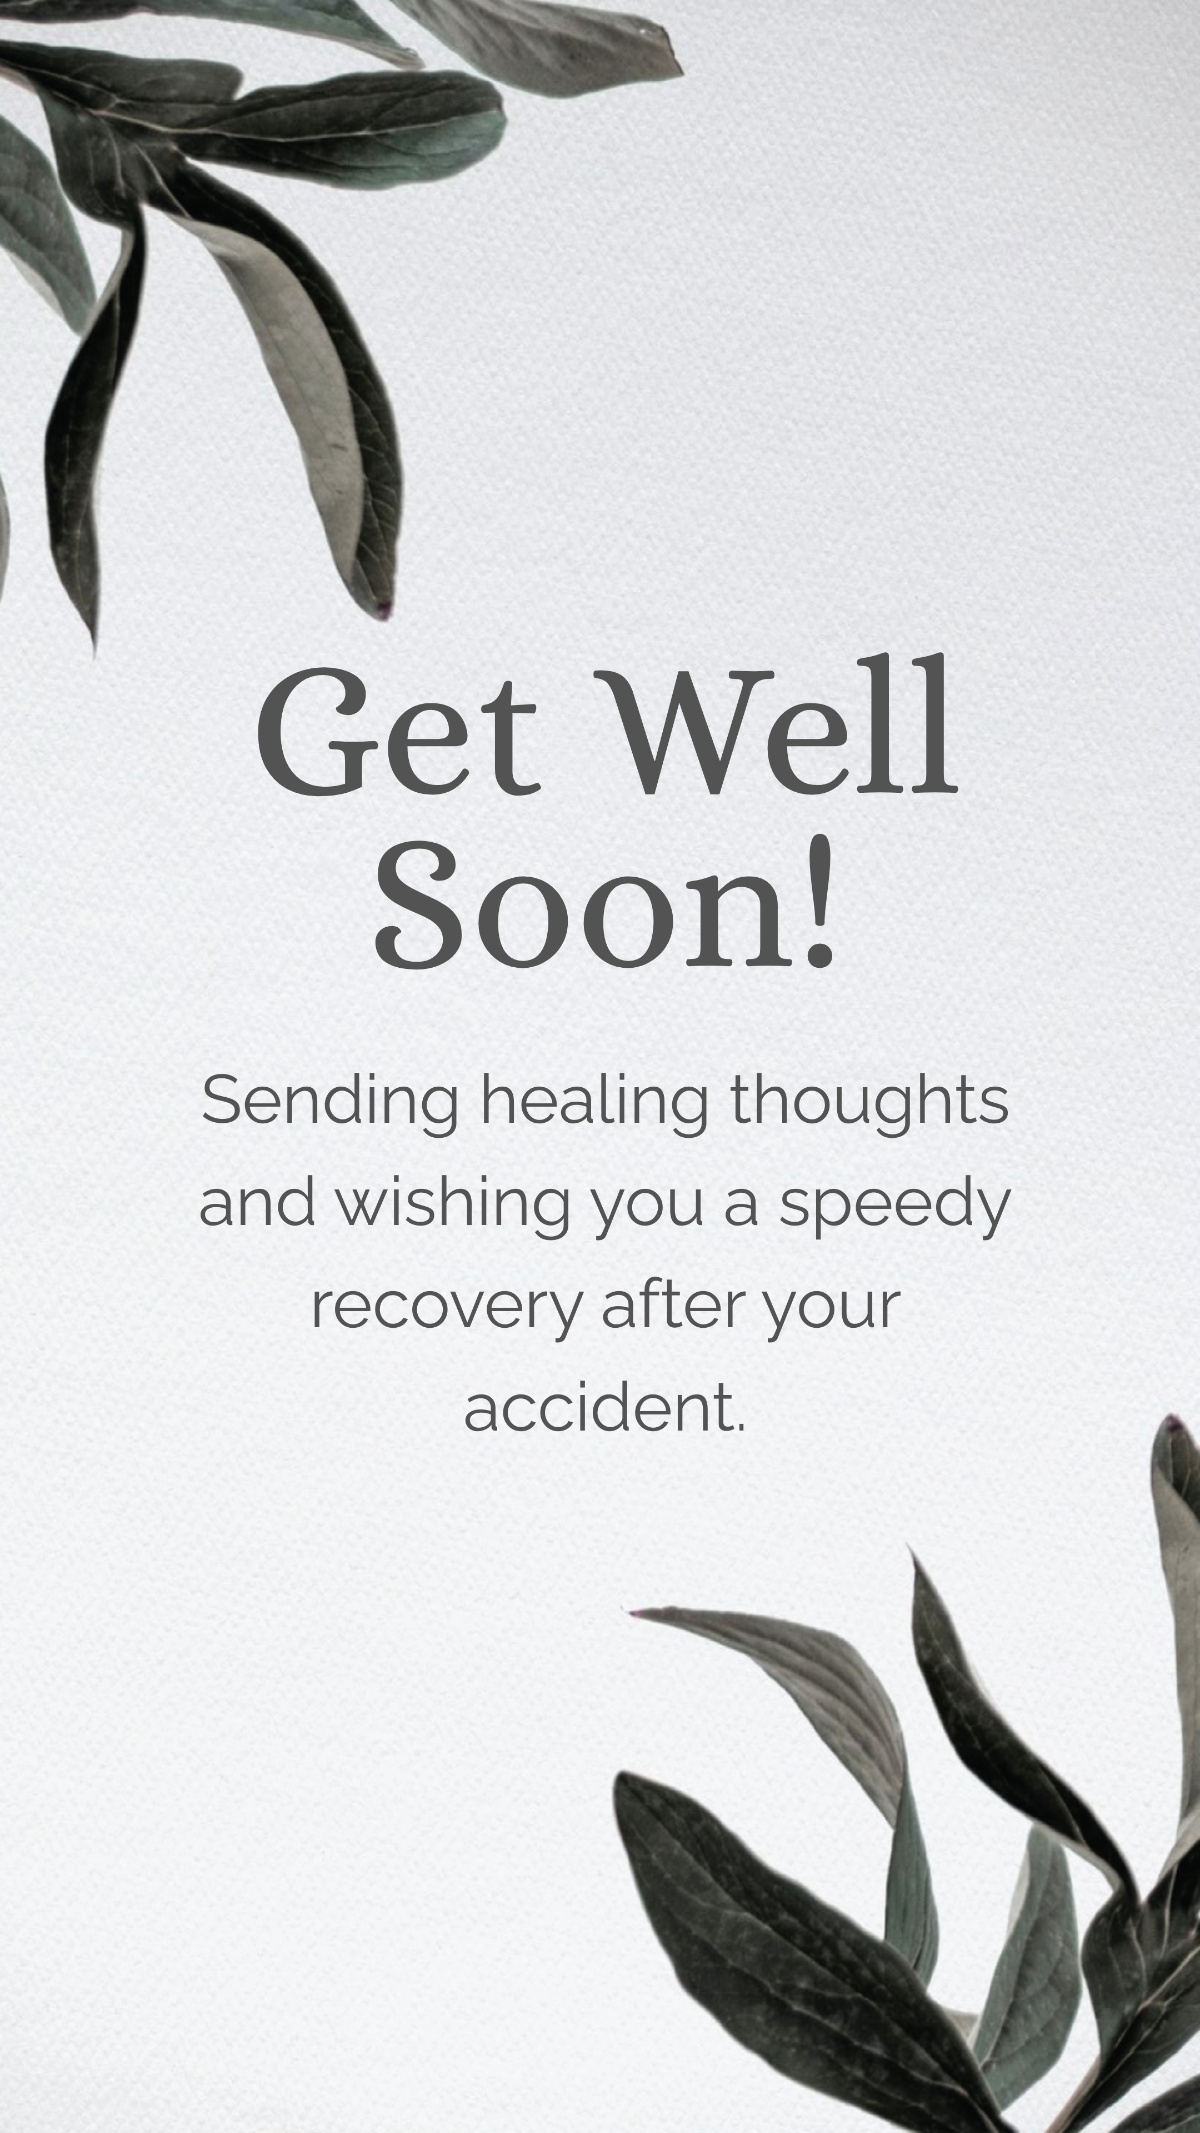 Get Well Soon After Accident Quote Template